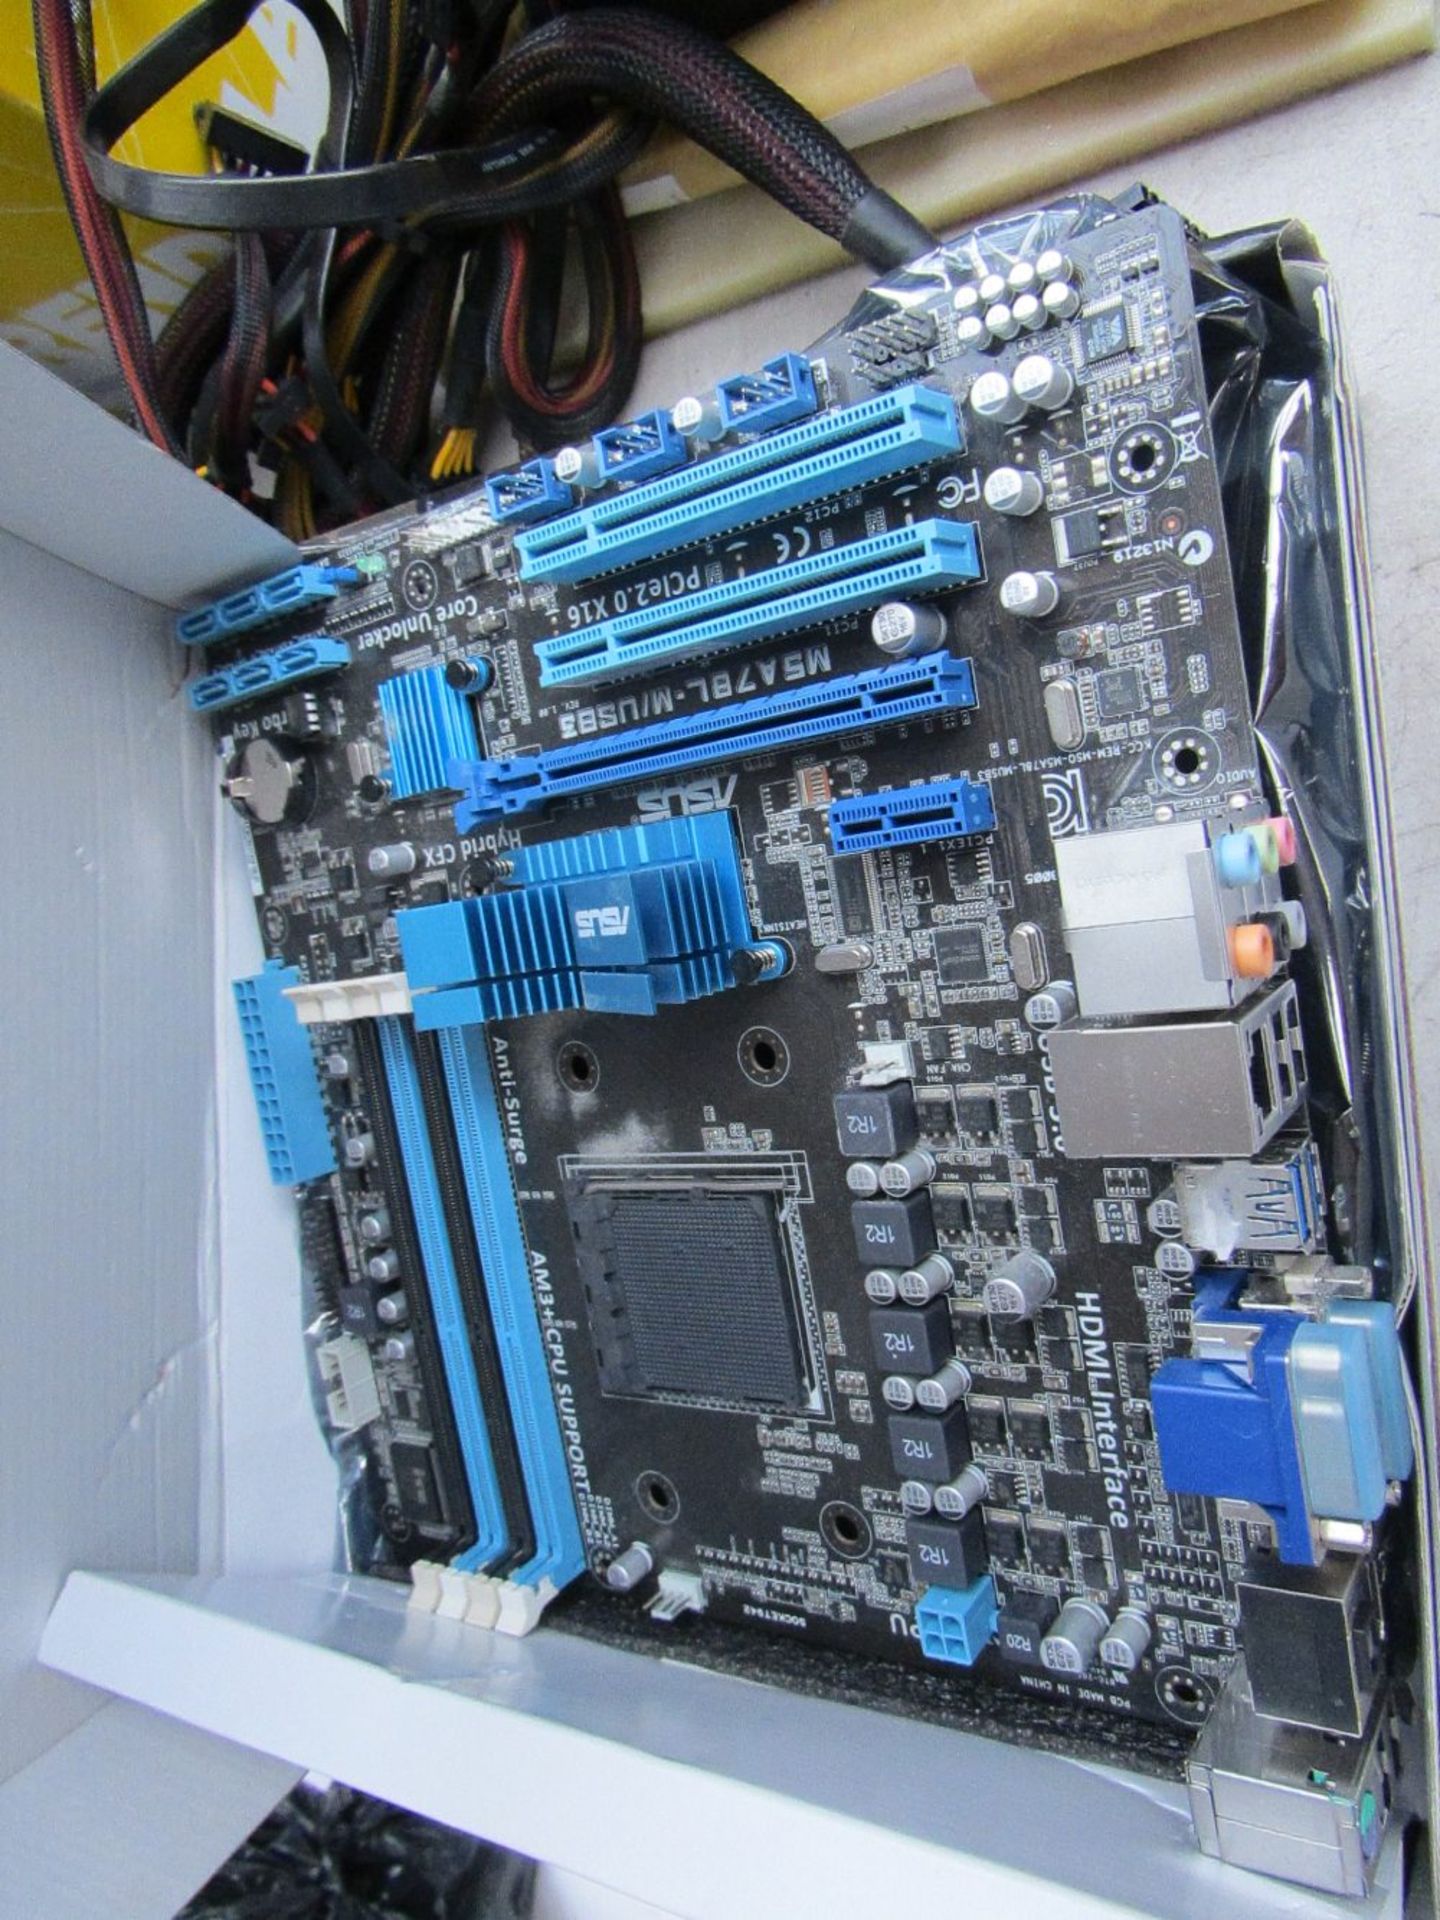 Asus M5A 78L-M USB3 motherboard with anti surge, in original box with packaging, un tested. RRP £130